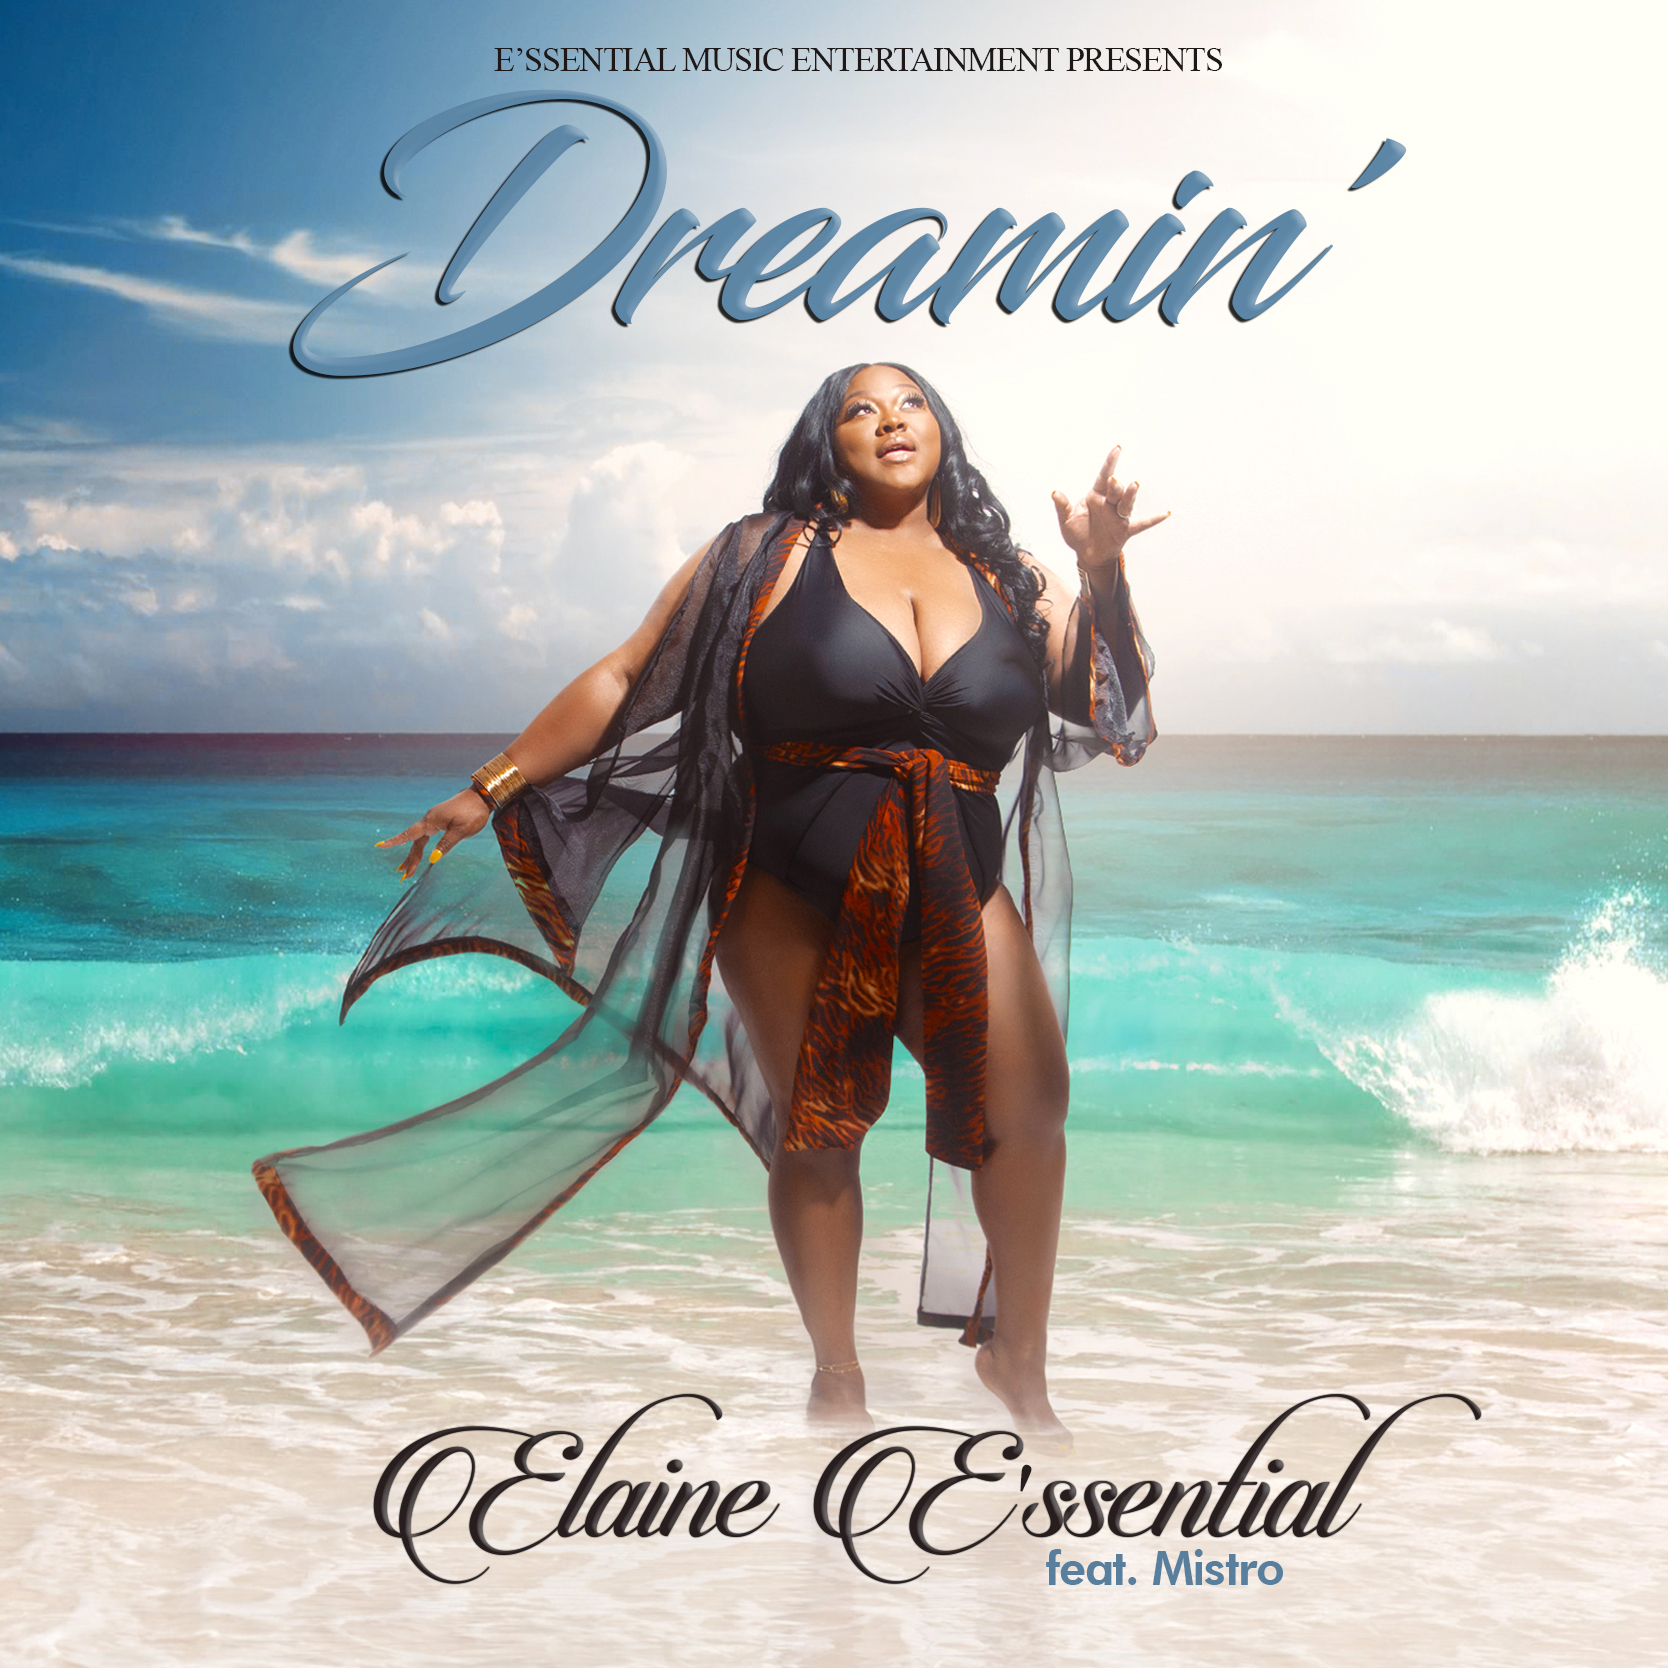 Embracing Self Love While Attracting The One You Dreamed Of: Talented Soul Empowerment Music Artist Elaine E’ssential Set to Release New Love Ballad, “Dreamin’“